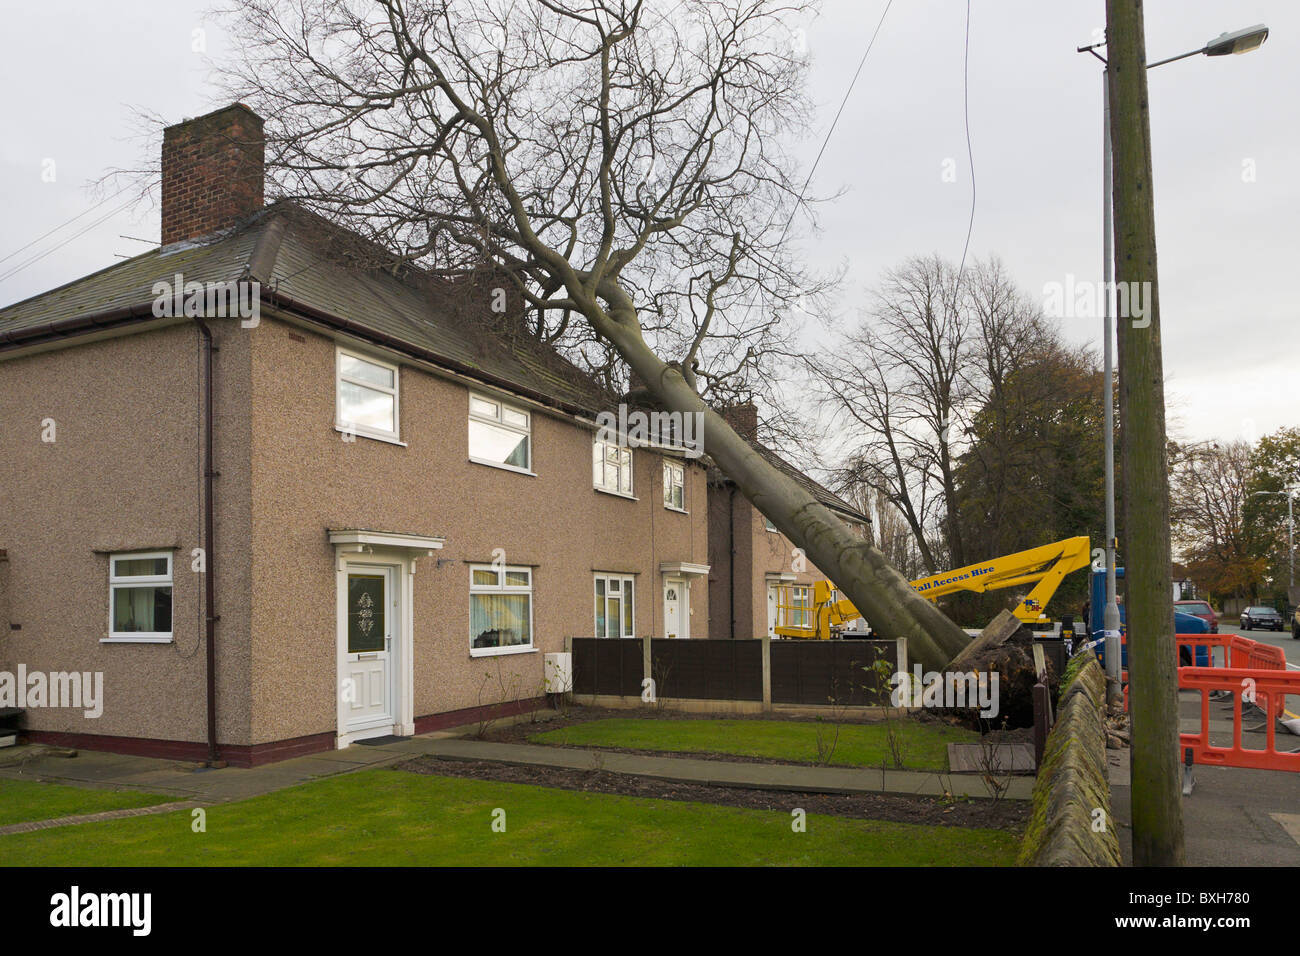 Tree falling on house, Wirral, England Stock Photo